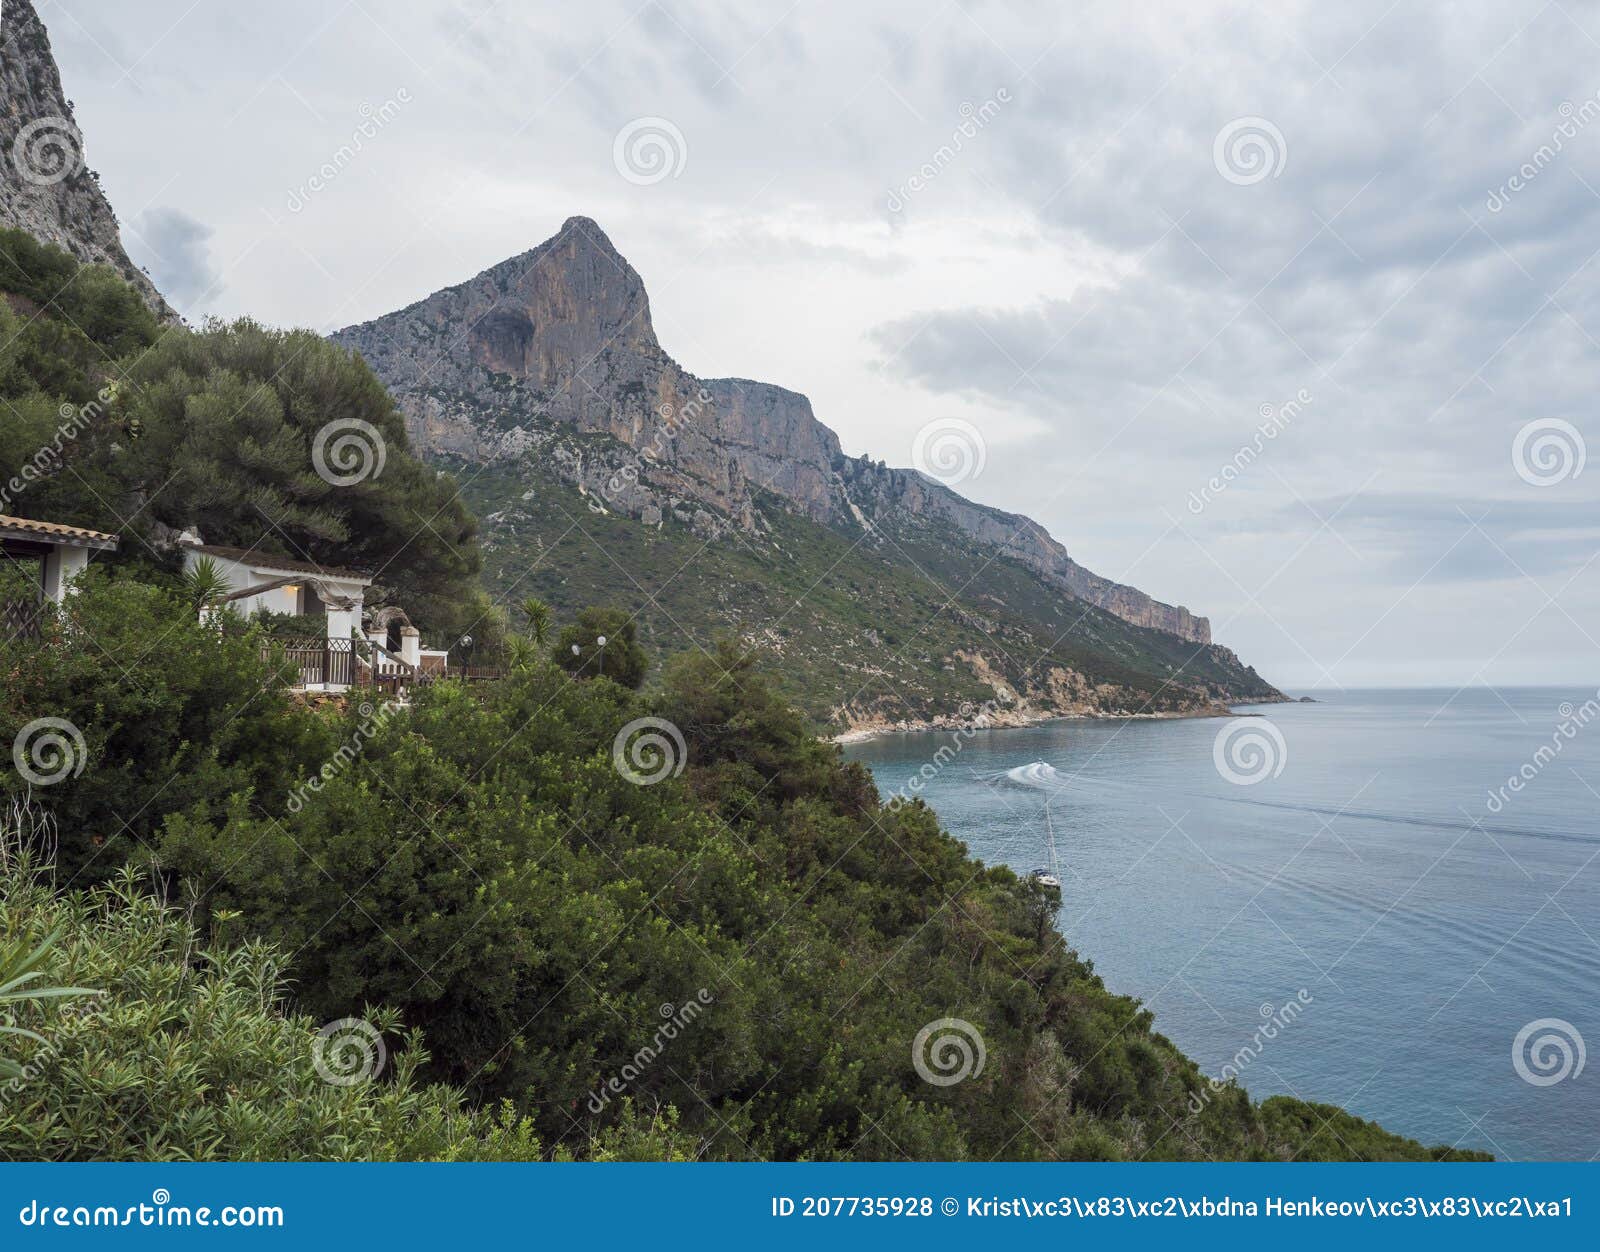 view over gulf of orosei from pedra longa with limestone cliffs, green bushes, restaurante house and turquoise blue